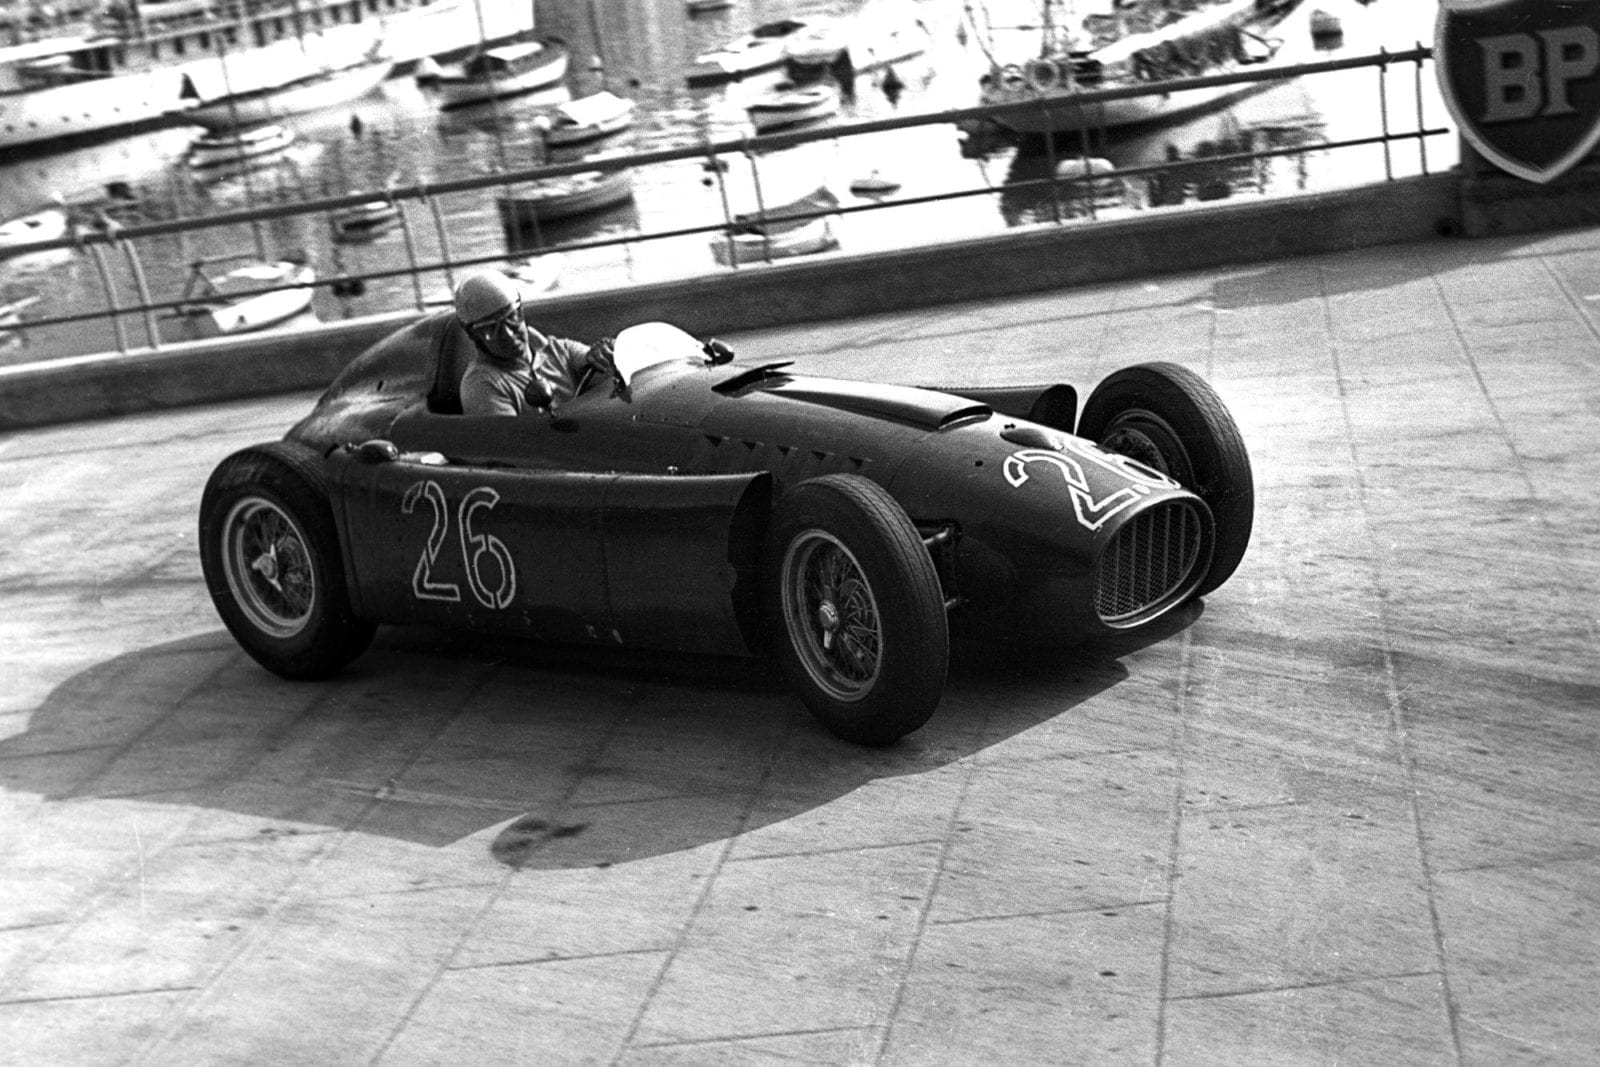 Alberto Ascari, Lancia D50, Grand Prix of Monaco, Circuit de Monaco, 22 May 1955. Alberto Ascari at the wheel of the Lancia D50 in the 1955 Monaco Grand Prix where, while in the lead, he crashed through the barriers into the harbour and had to swim to safety. Four days later, he was killed while testing in Monza.